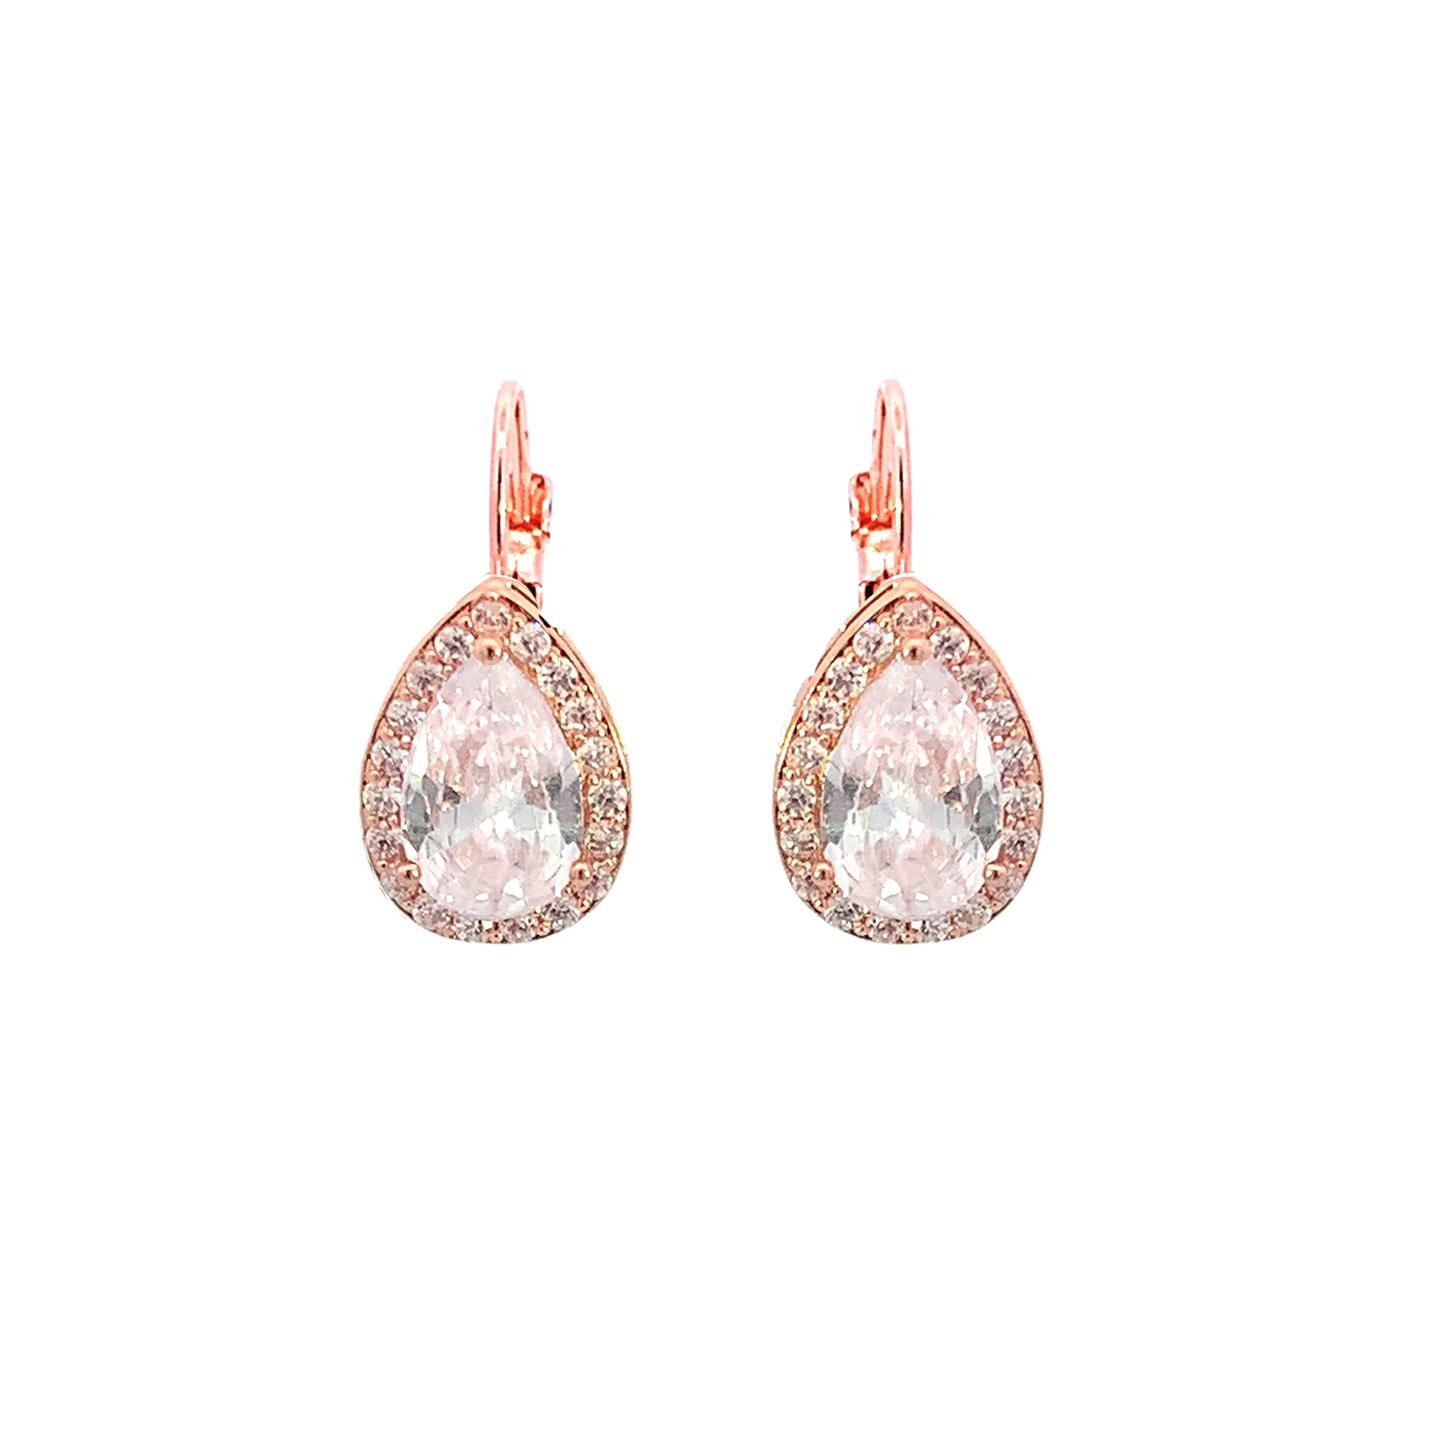 pear shaped crystal drop earrings with lever back posts in rose gold